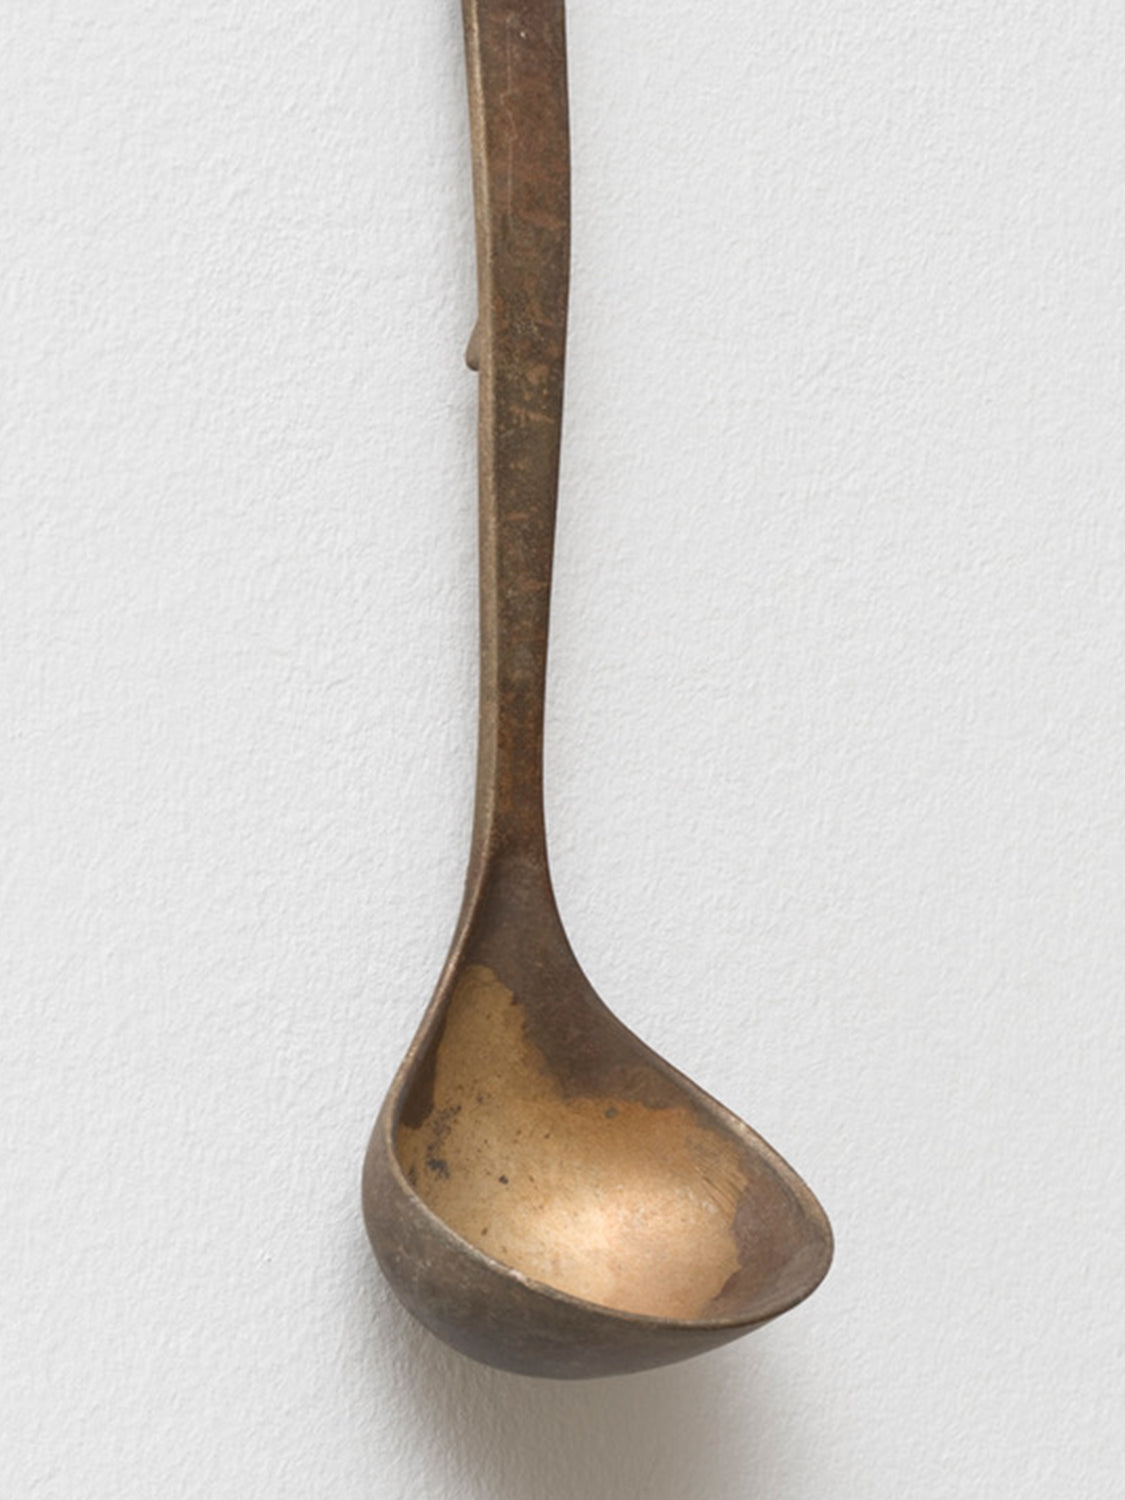 Gemäß - According to (Suppenkelle / soup ladle)